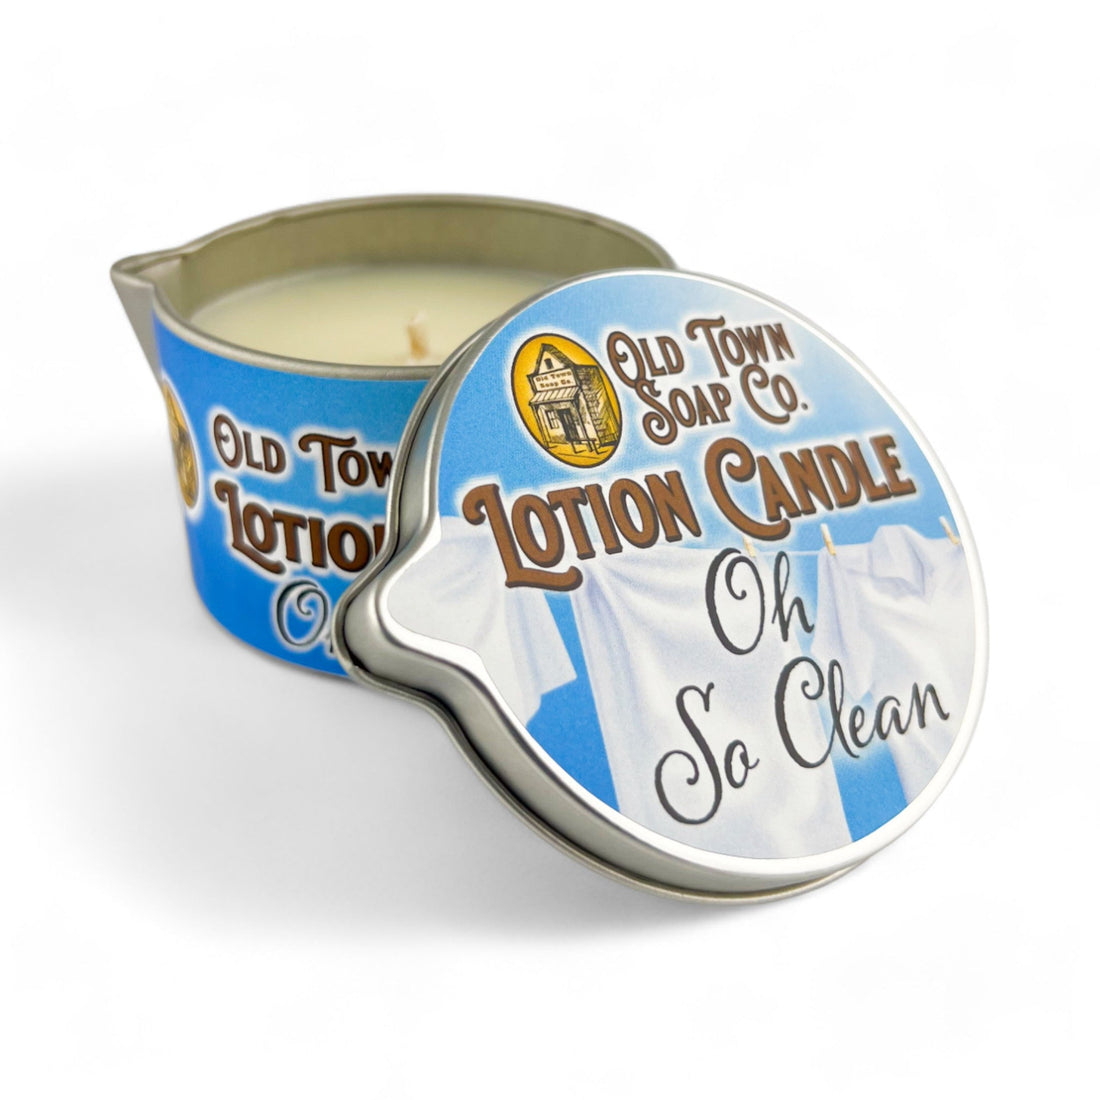 Oh So Clean -Lotion Candles - Old Town Soap Co.